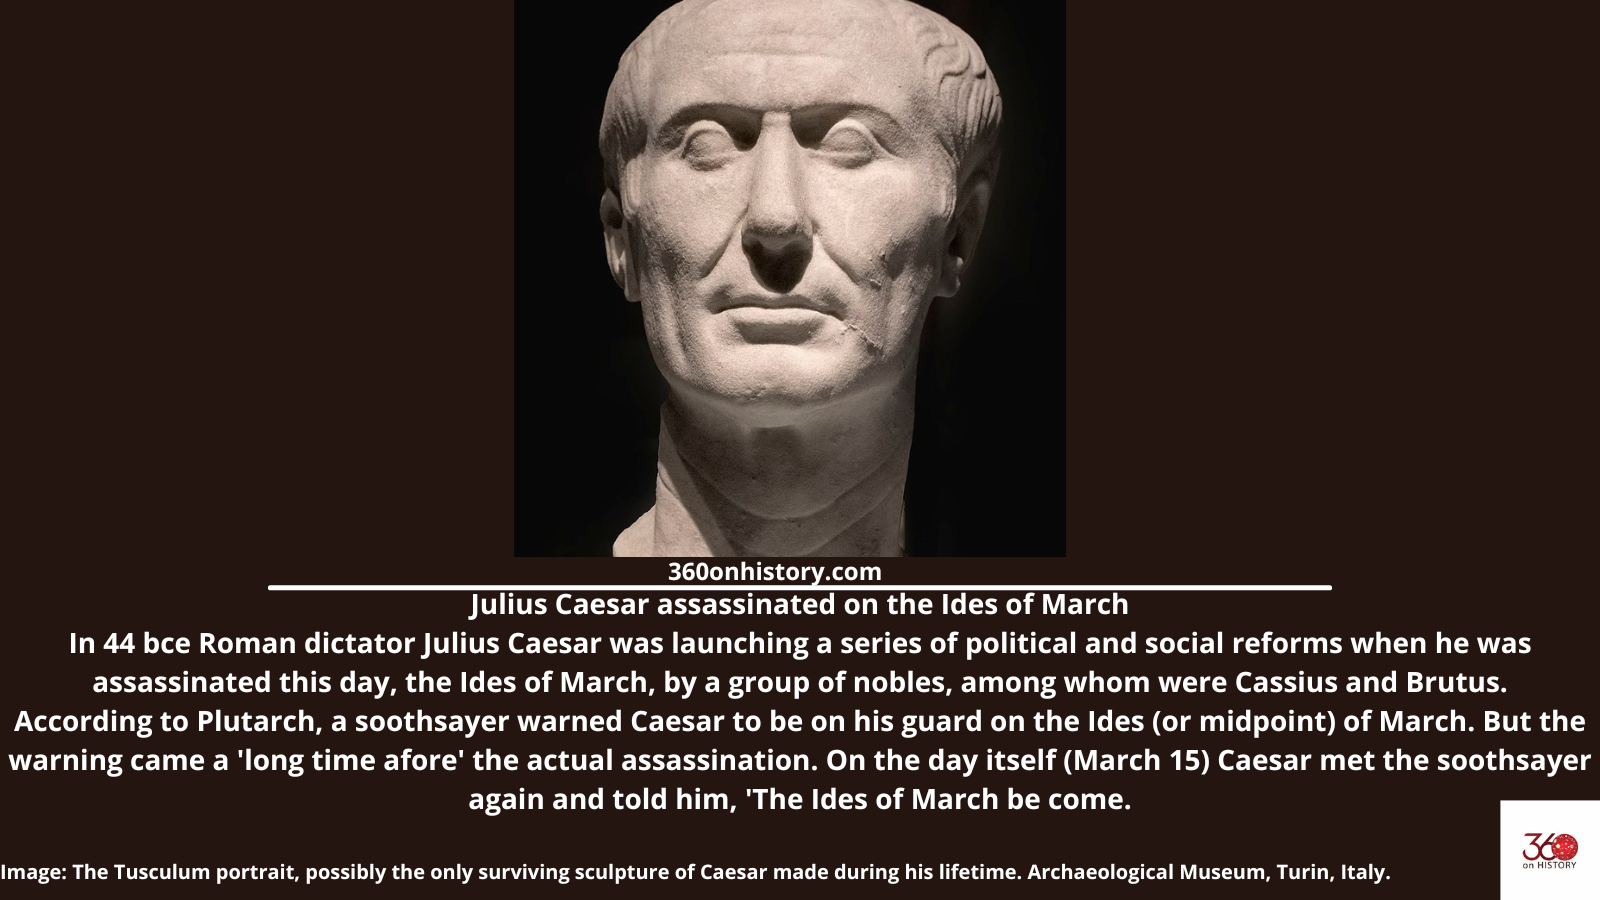 Julius Caesar assassinated on the Ides of March In 44 bce Roman dictator Julius Caesar was launching a series of political and social reforms when he was assassinated this day, the Ides of March, by a group of nobles, among whom were Cassius and Brutus. According to Plutarch, a soothsayer warned Caesar to be on his guard on the Ides (or midpoint) of March. But the warning came a 'long time afore' the actual assassination. On the day itself (March 15) Caesar met the soothsayer again and told him, 'The Ides of March be come. Image: The Tusculum portrait, possibly the only surviving sculpture of Caesar made during his lifetime. Archaeological Museum, Turin, Italy.